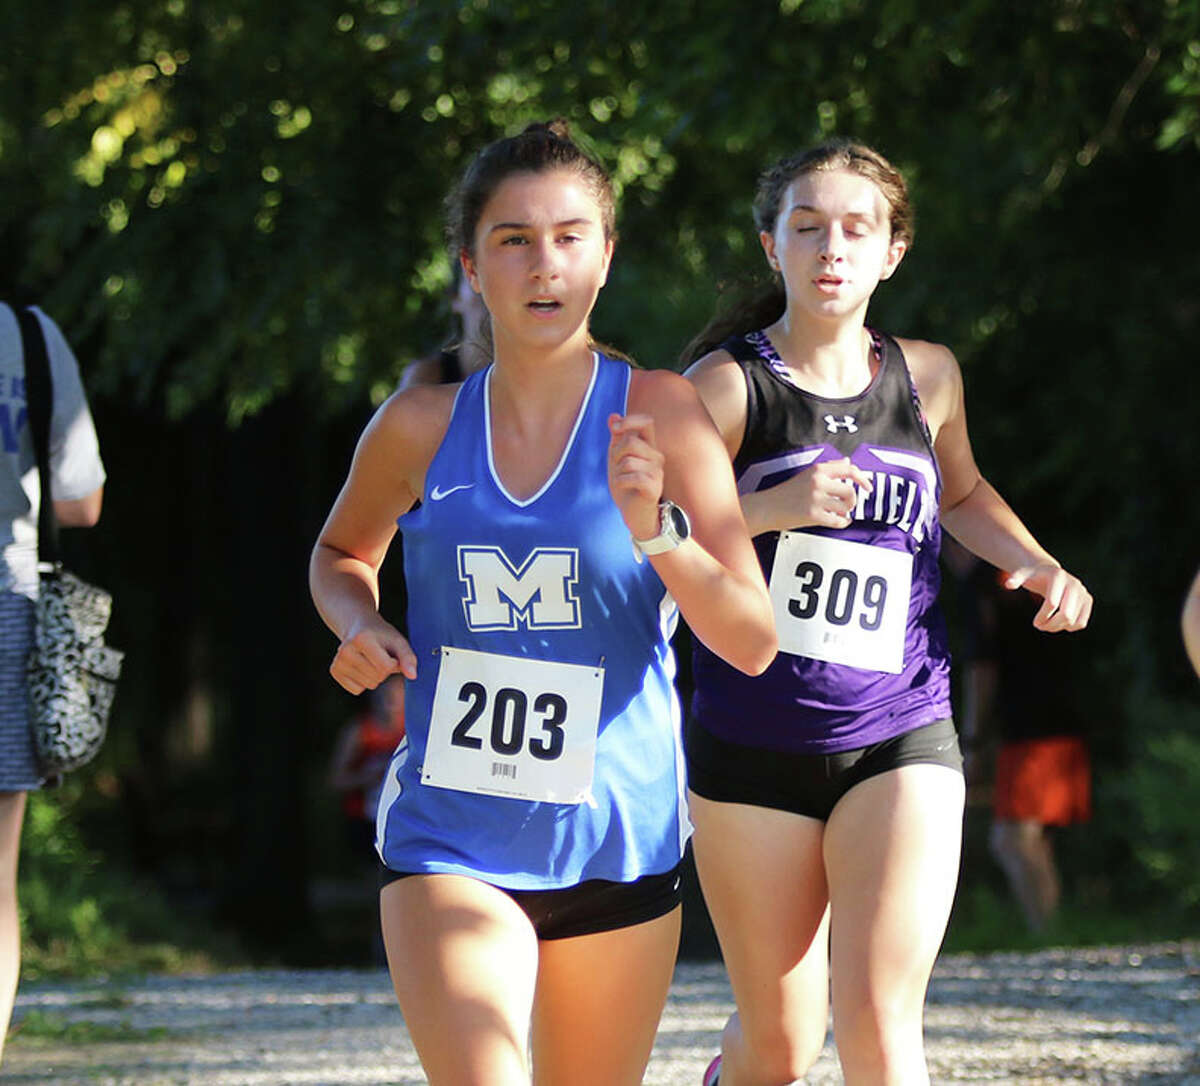 Marquette Catholic's Katie Johnson (left) runs during the Carlinville Early Meet earlier this season. On Wednesday, Johnson finished 15th to lead the Explorers at the Collinsville Invite.